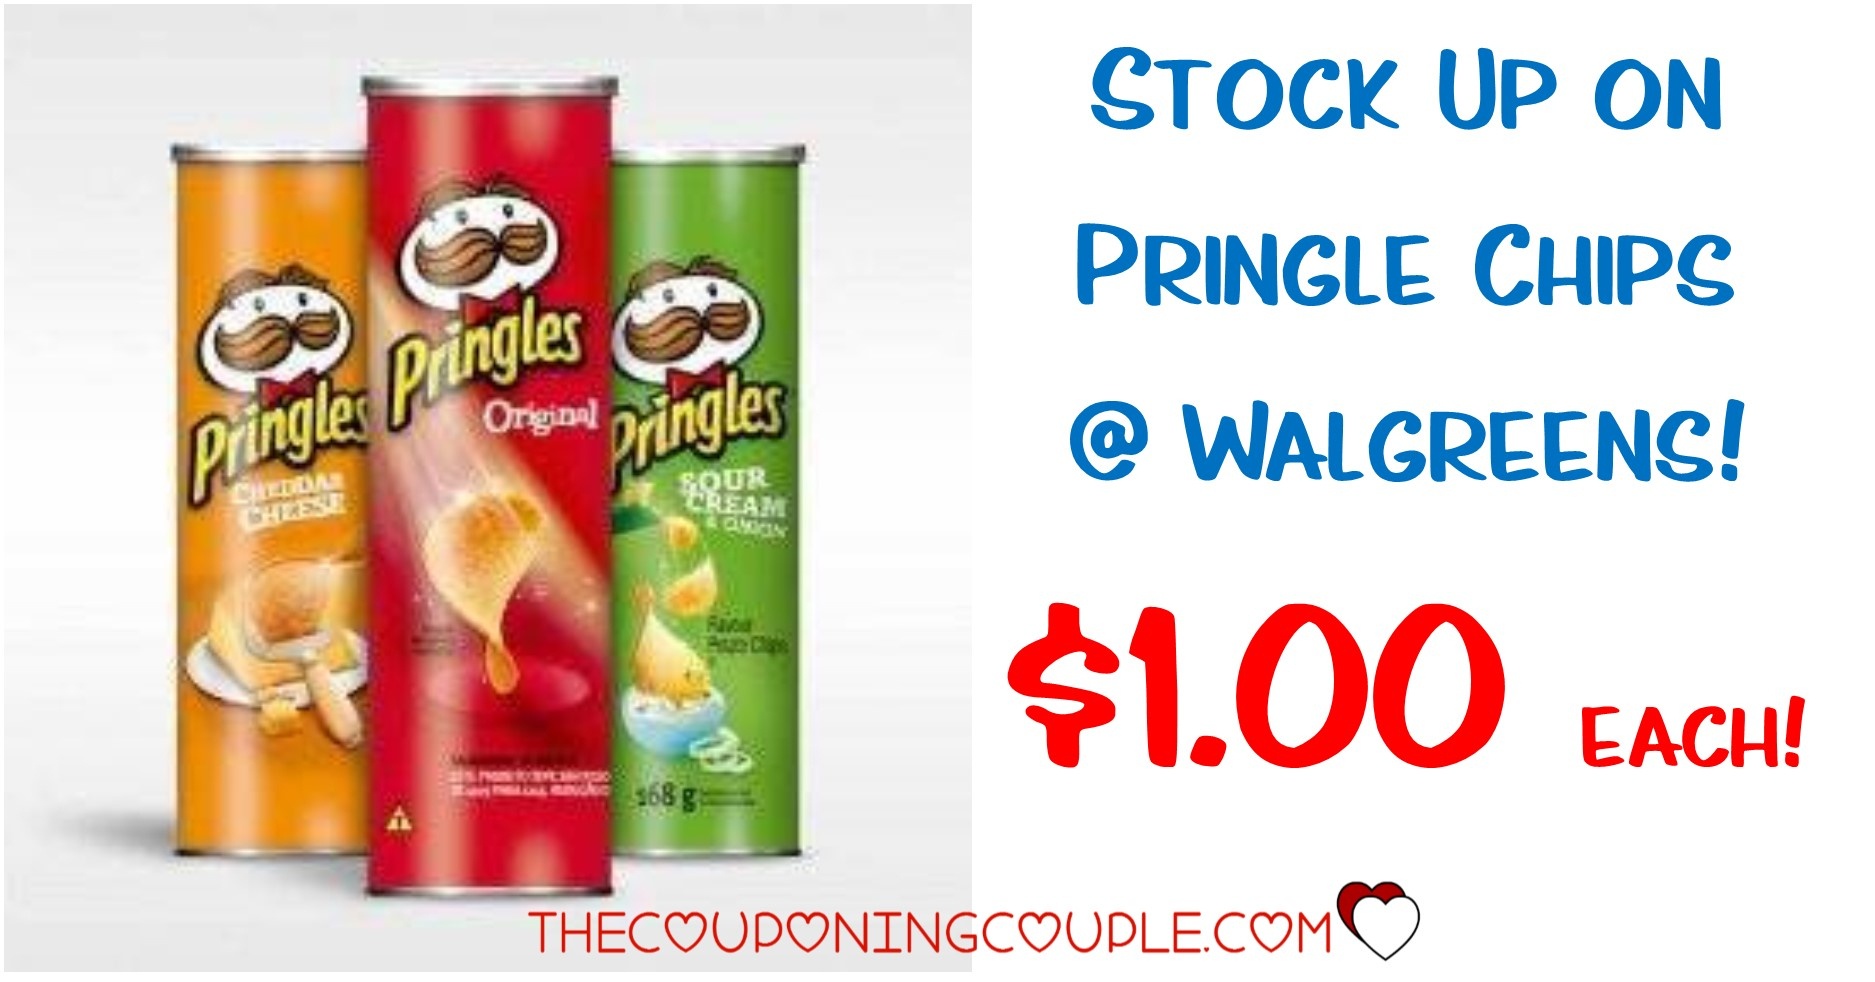 Pringles Canisters - Only $1 Each With Walgreens Deal! - Free Printable Pringles Coupons